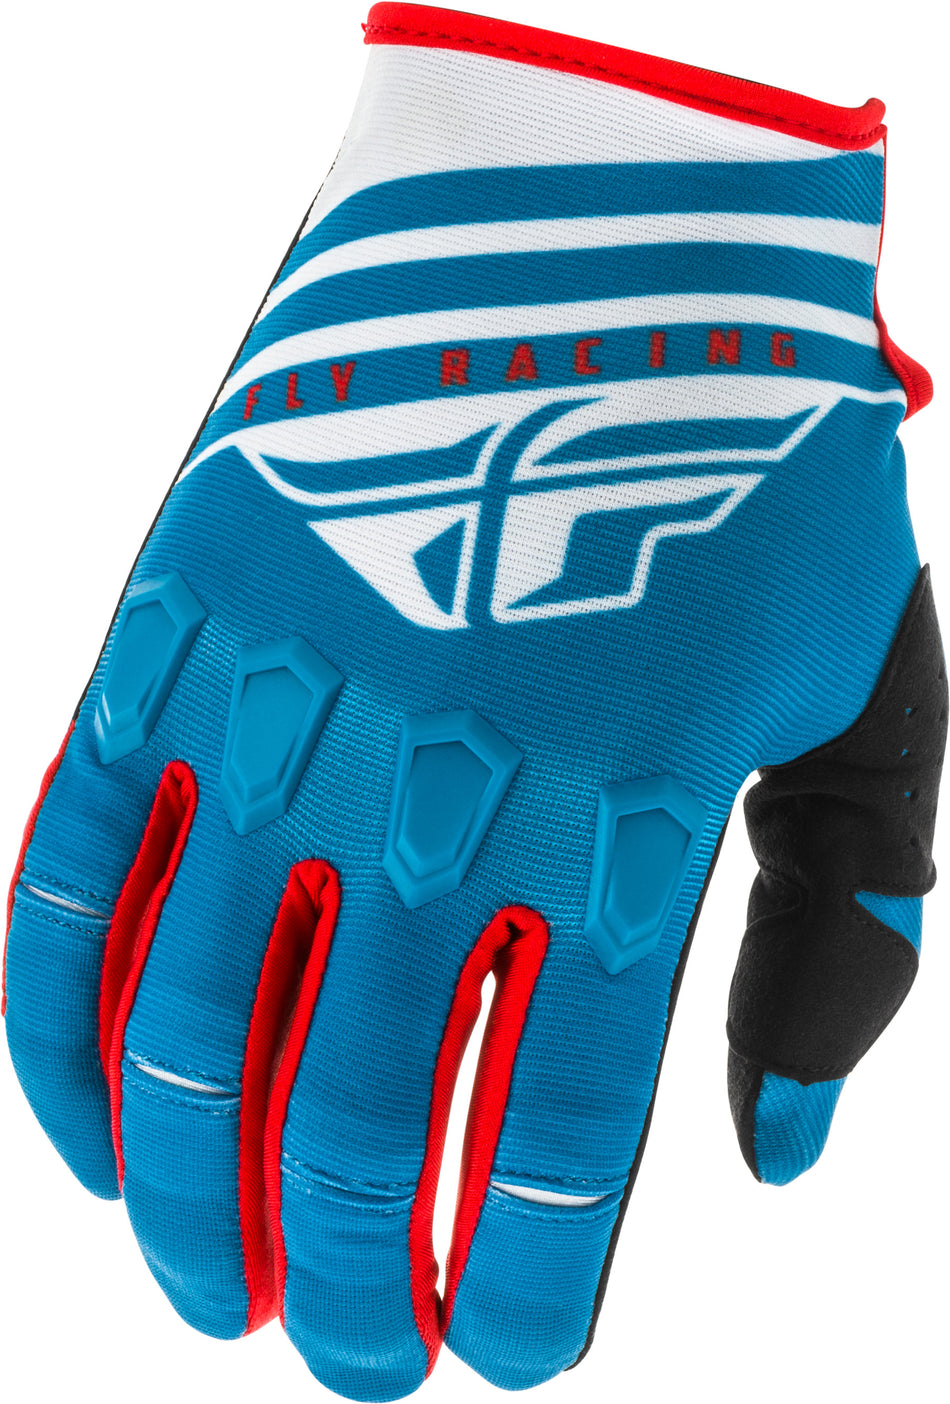 FLY RACING Kinetic K220 Gloves Blue/White/Red Sz 06 373-51106